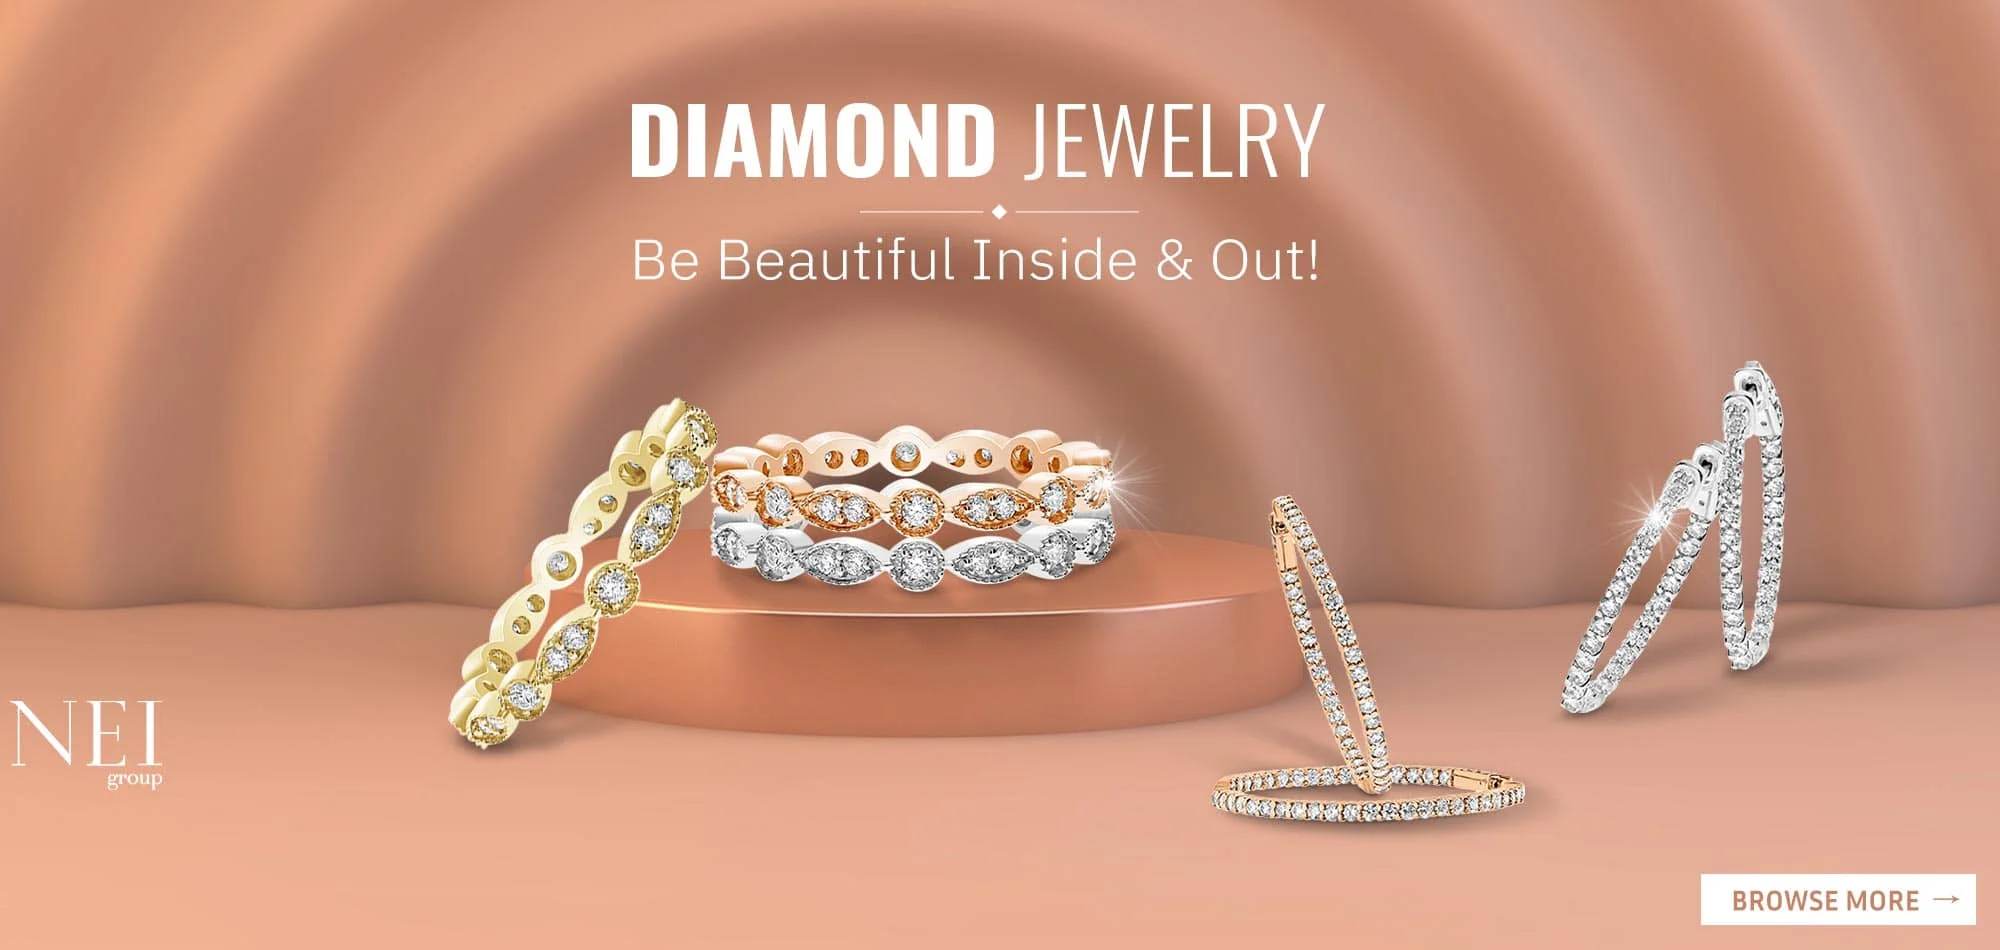 NEI Group Jewelry Collection Available At M&M Jewelers